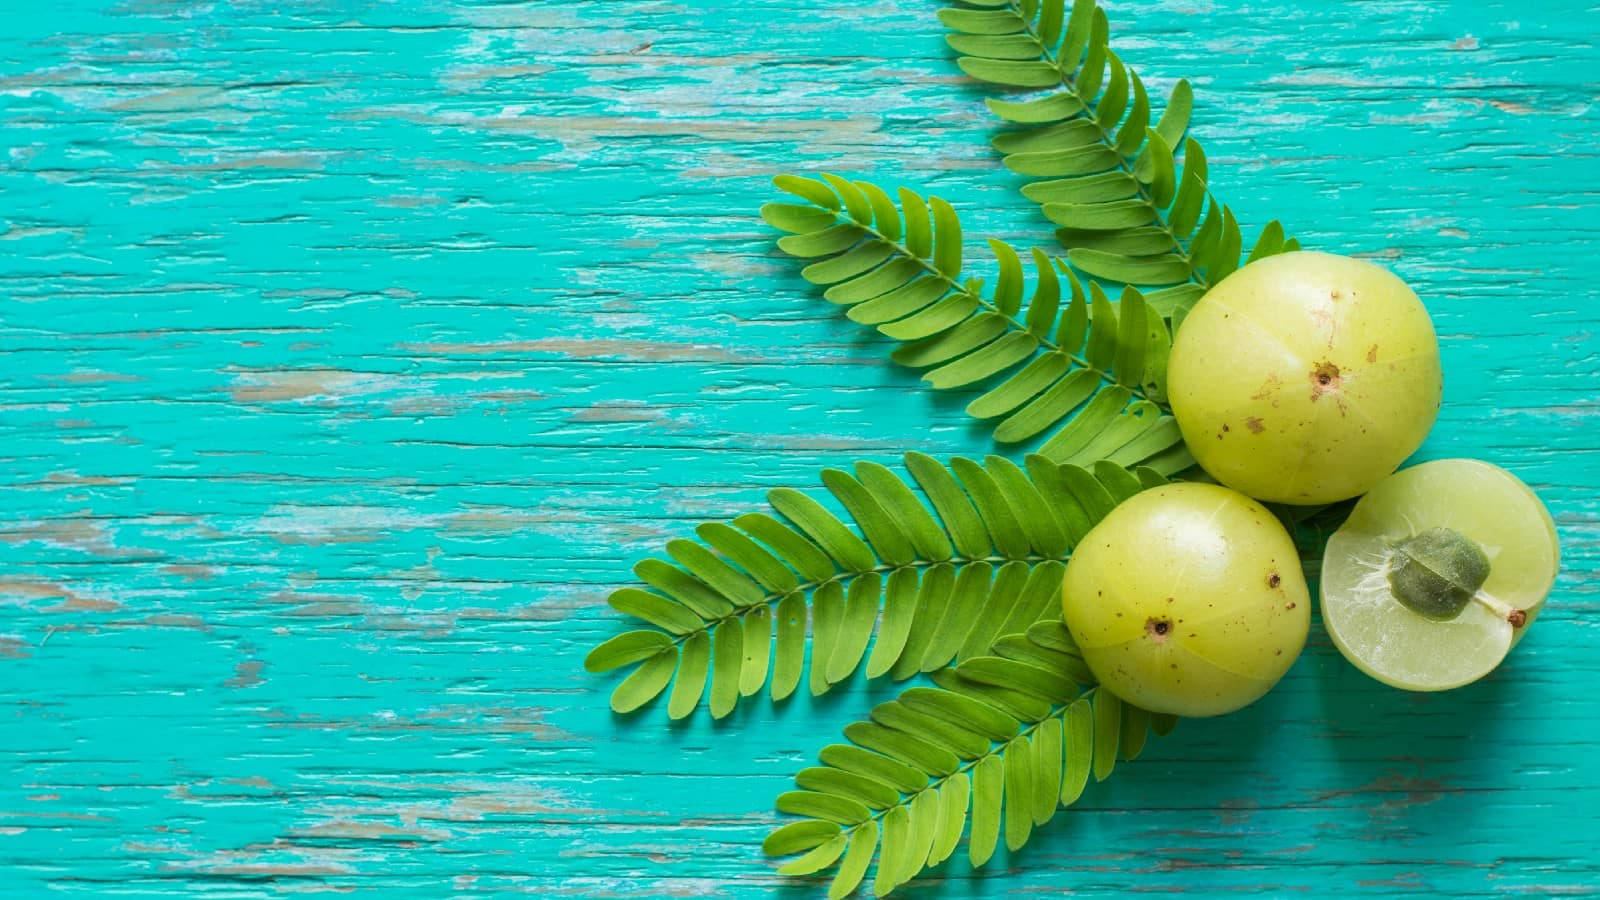 "Ripened Indian Gooseberry Amla on a Rustic Background" Wallpaper